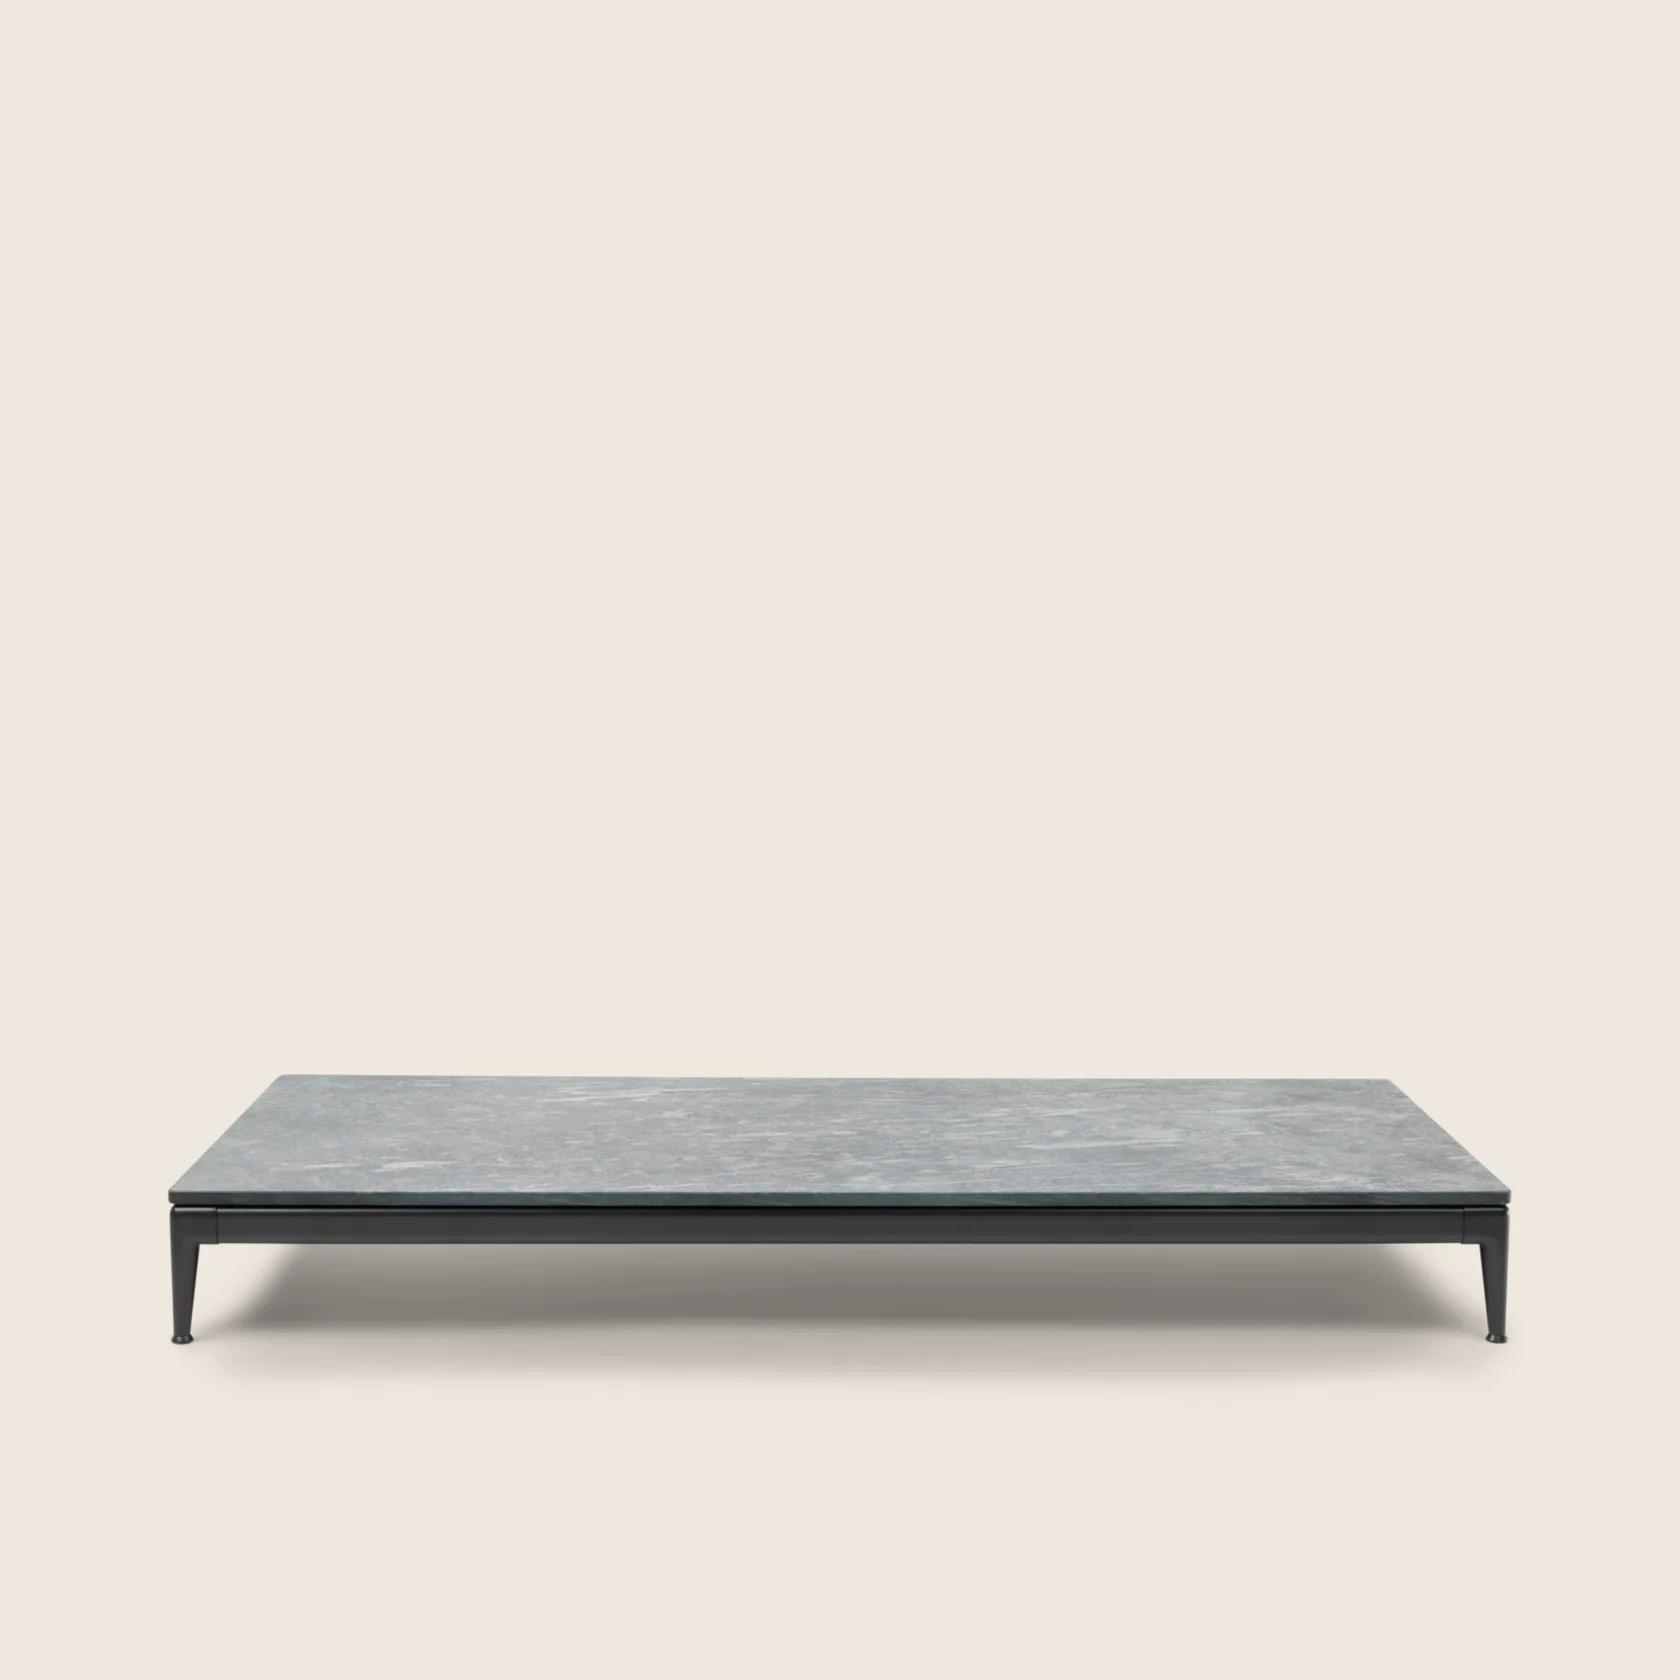 0283H1_PICO OUTDOOR_COFFEETABLE_06.png